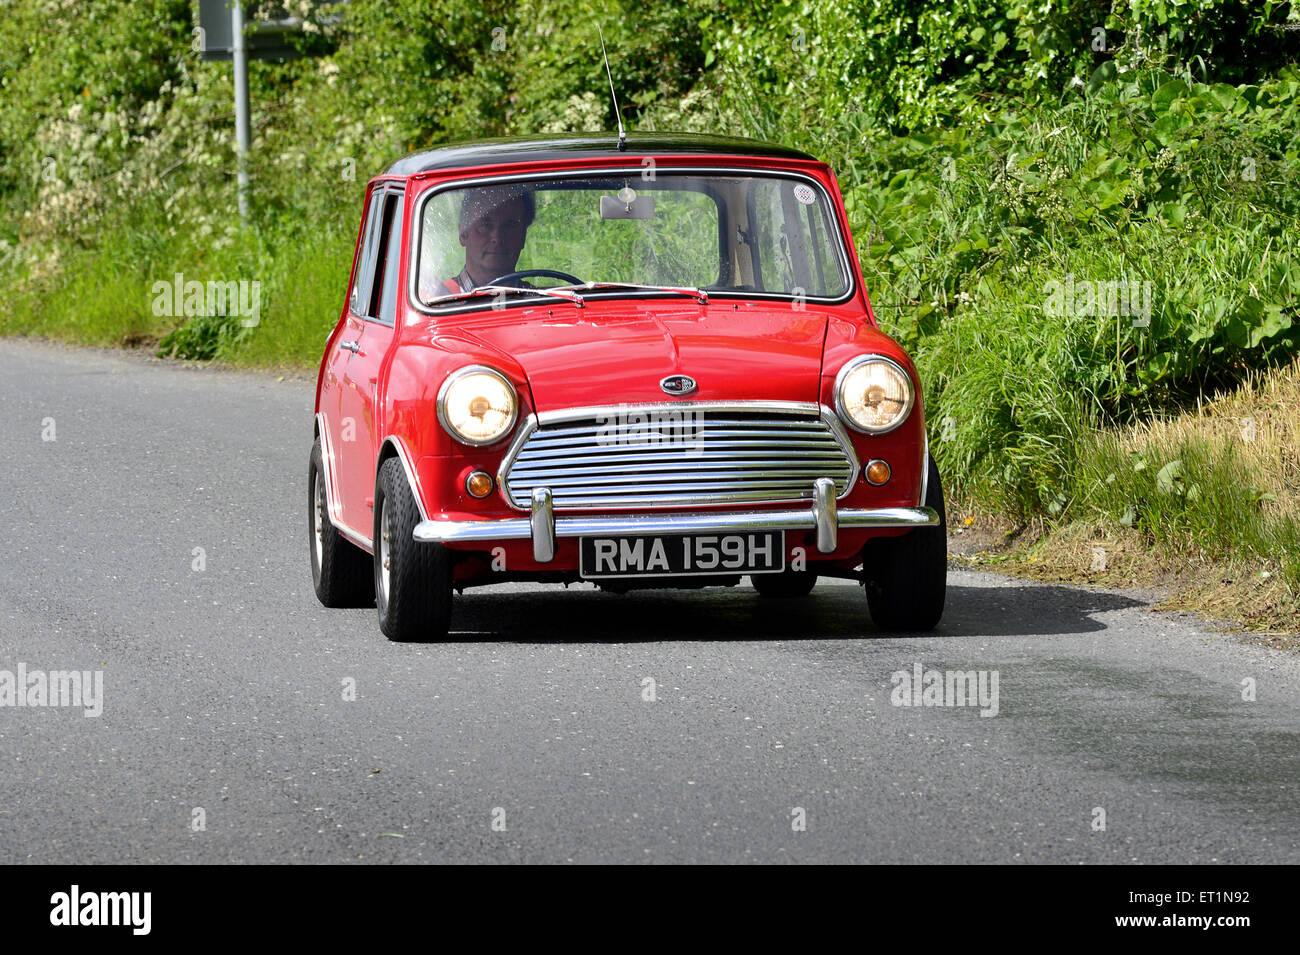 Austin Mini Cooper S 1965 Vintage car on country road, Burnfoot, County Donegal, Ireland. Stock Photo